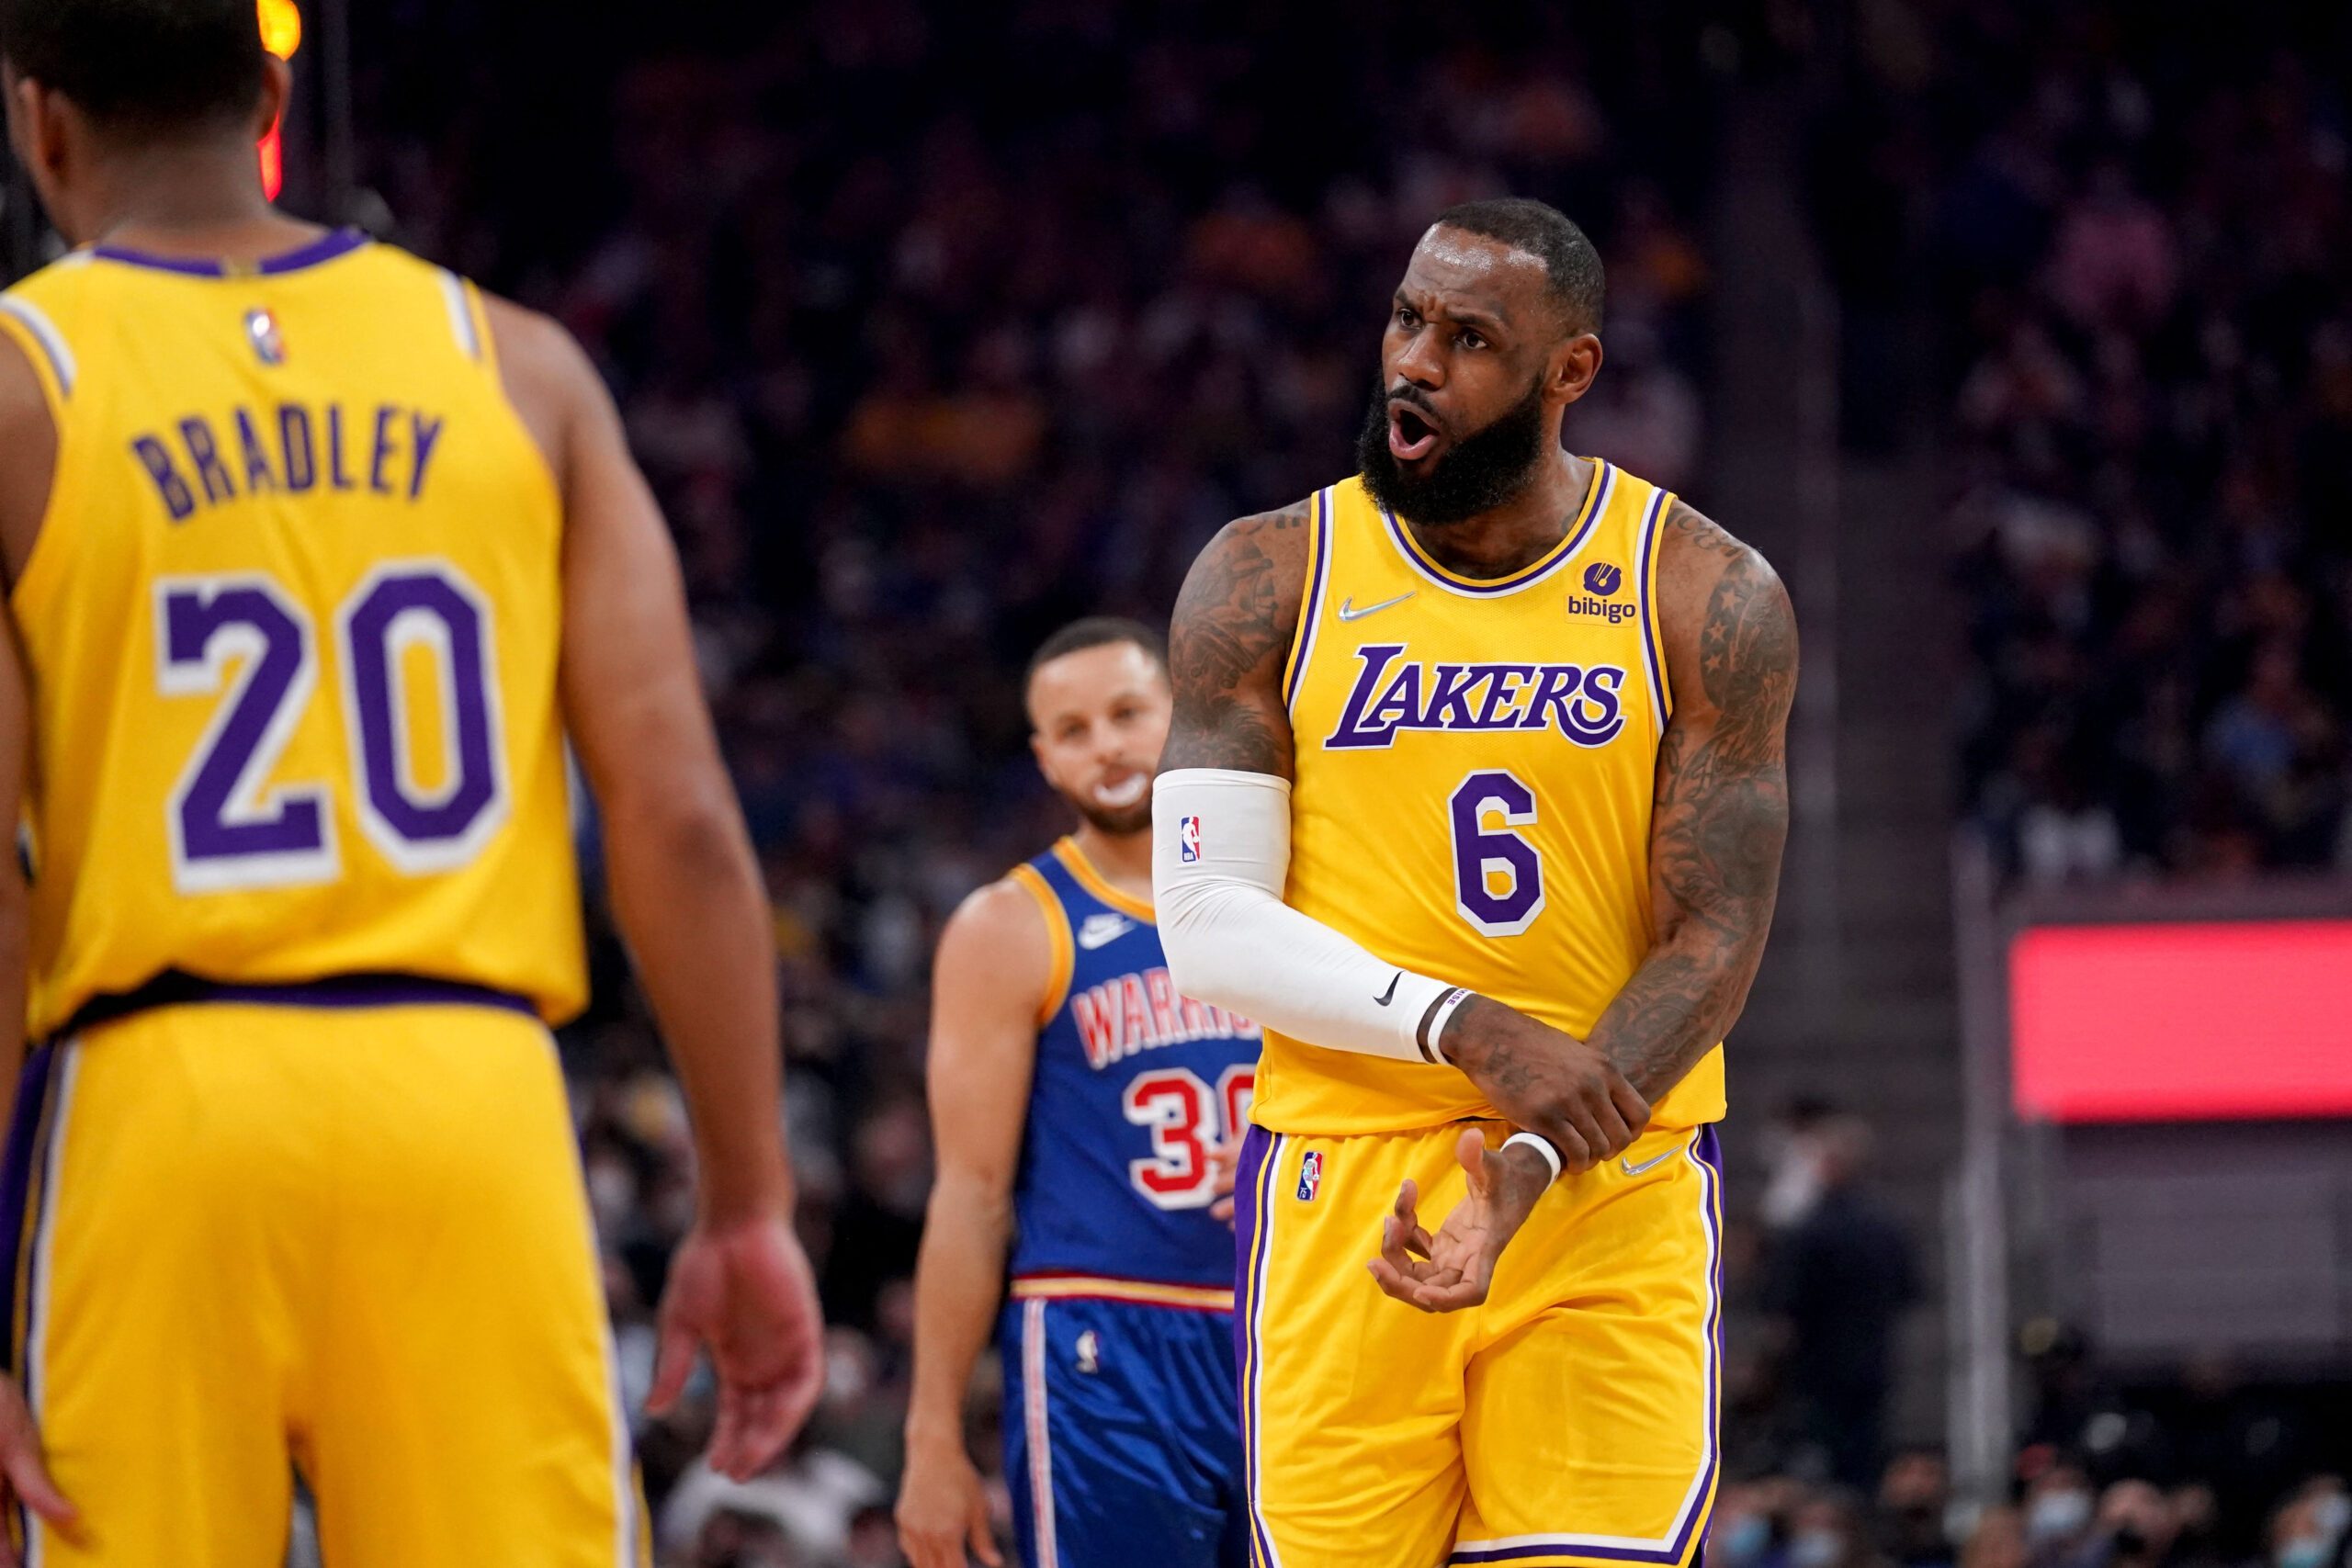 Jeanie Buss Says Lakers Have Made A Decision On Retiring LeBron